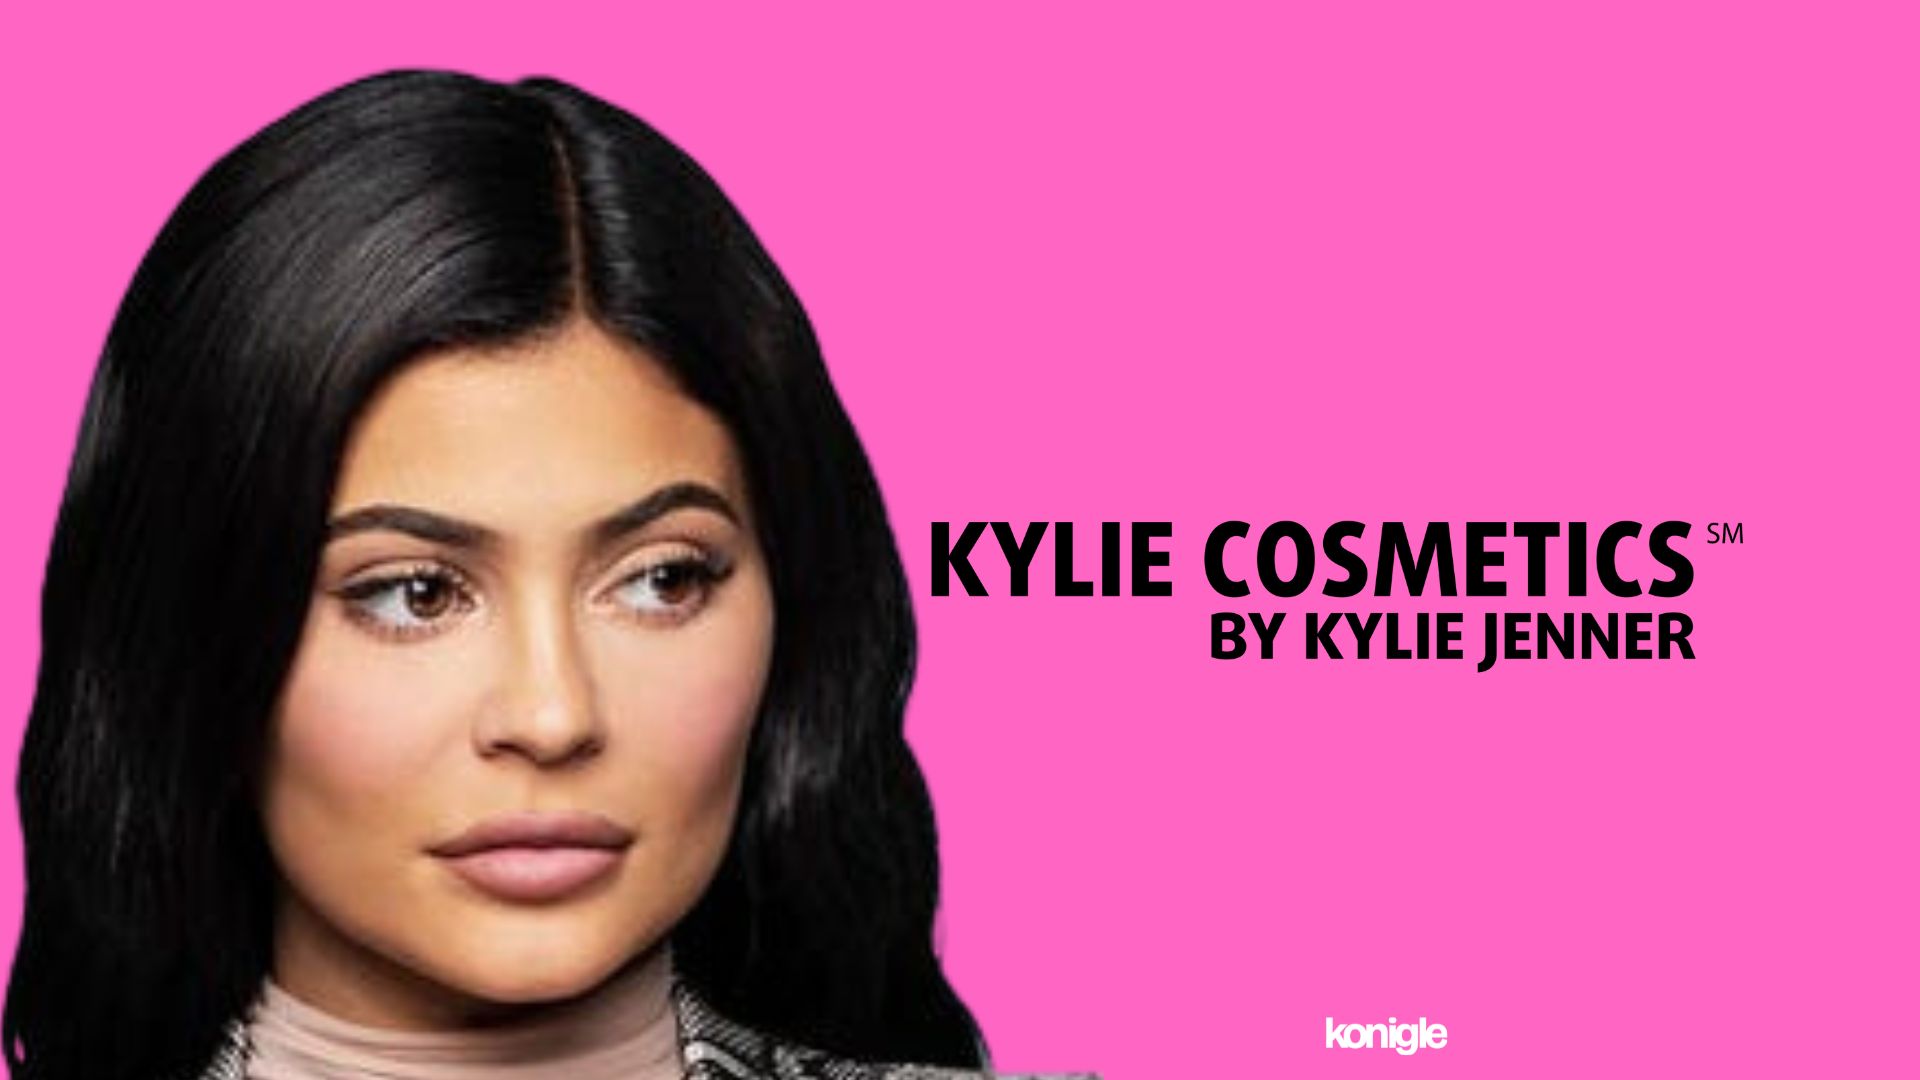 Kylie Jenner uses this tactic to improve conversion rate on her Shopify store.